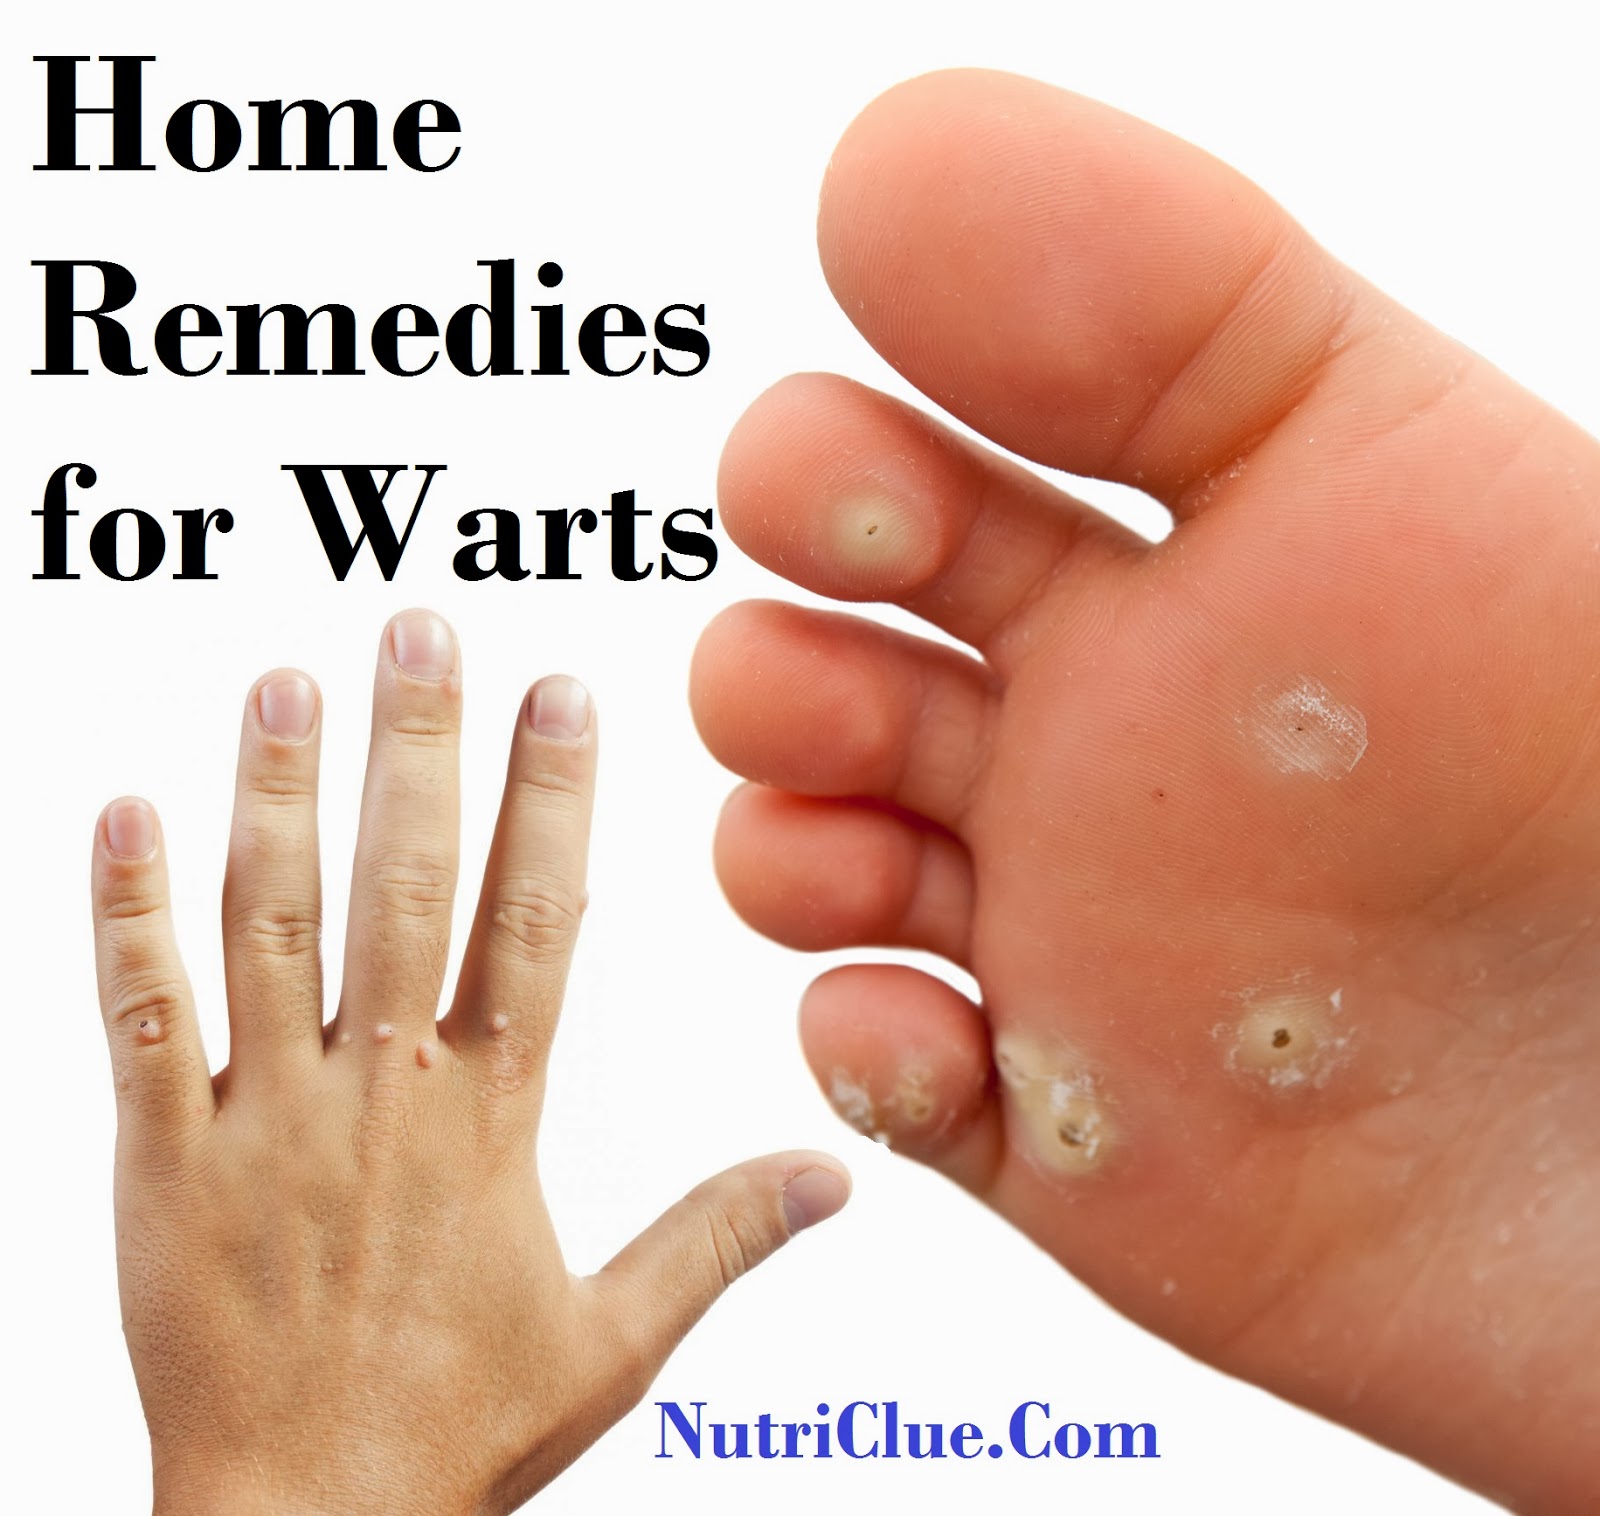 Wart treatment at home, comfort inner soles, arch support for flat feet